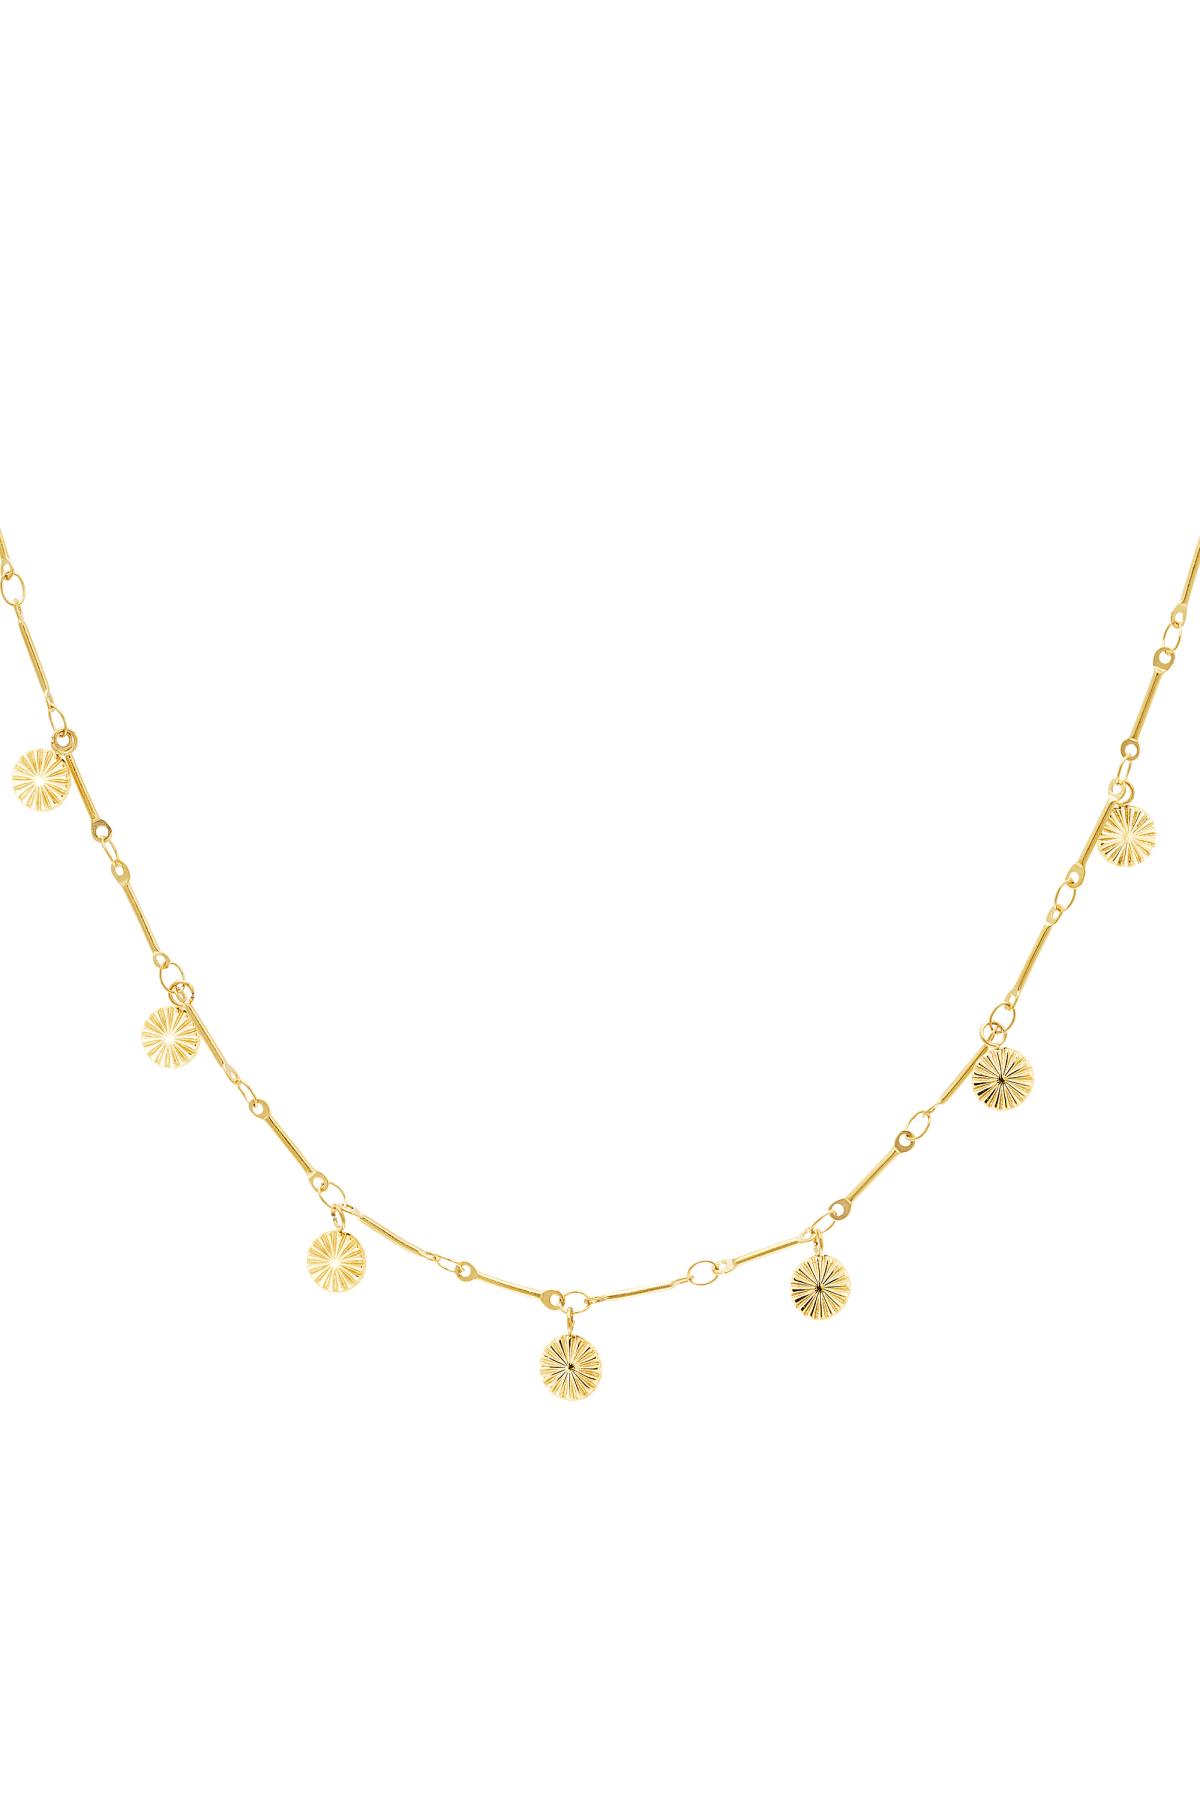 Necklace with flower coin charms Gold Stainless Steel h5 